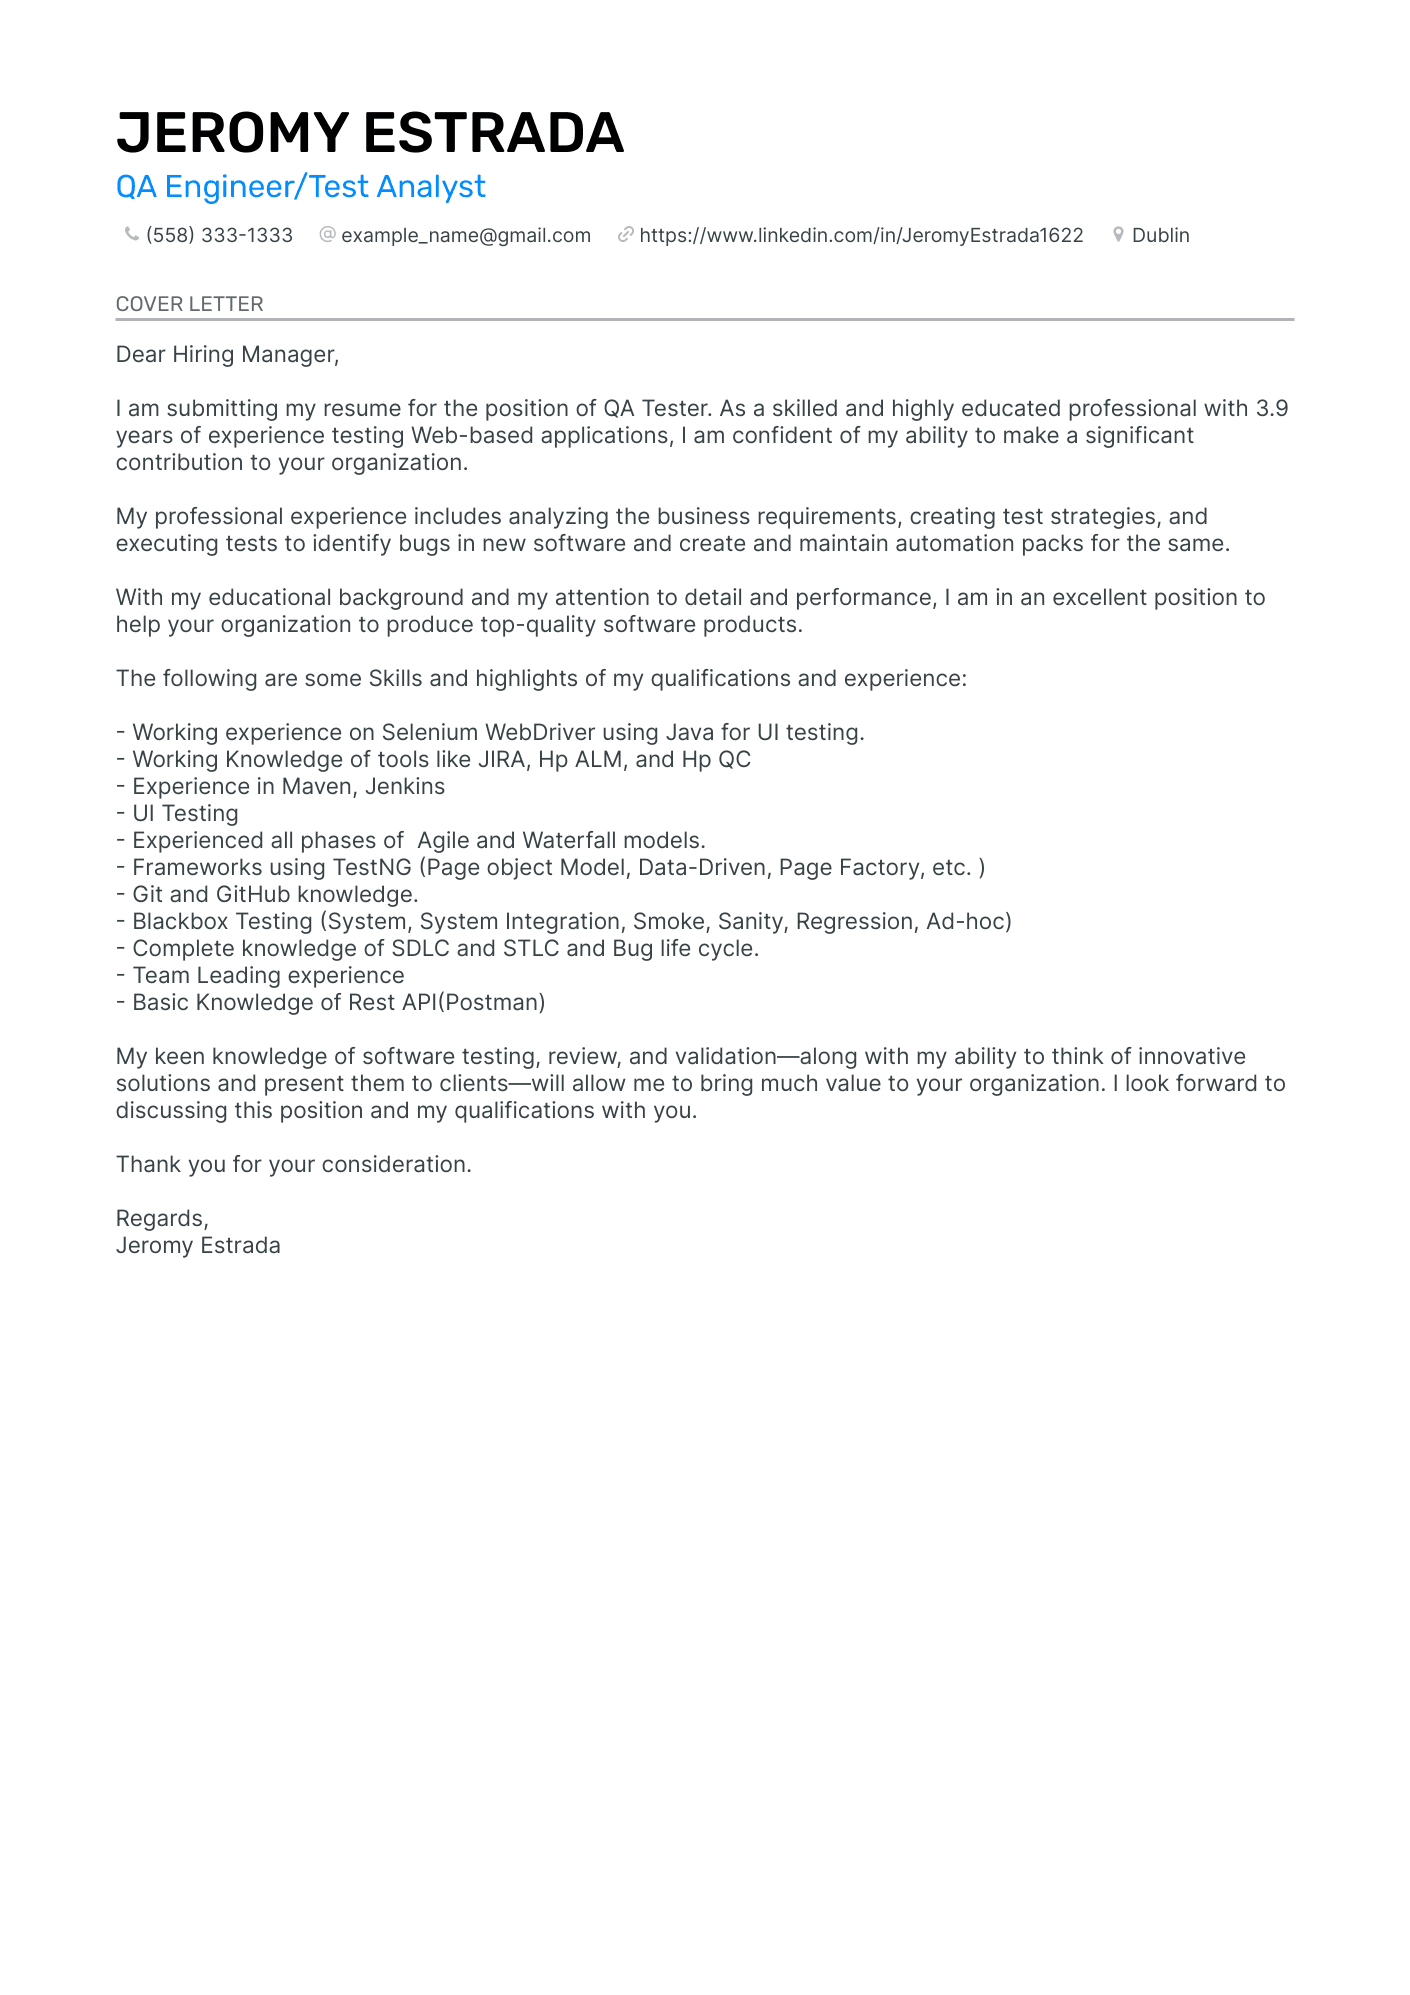 QA engineer cover letter example